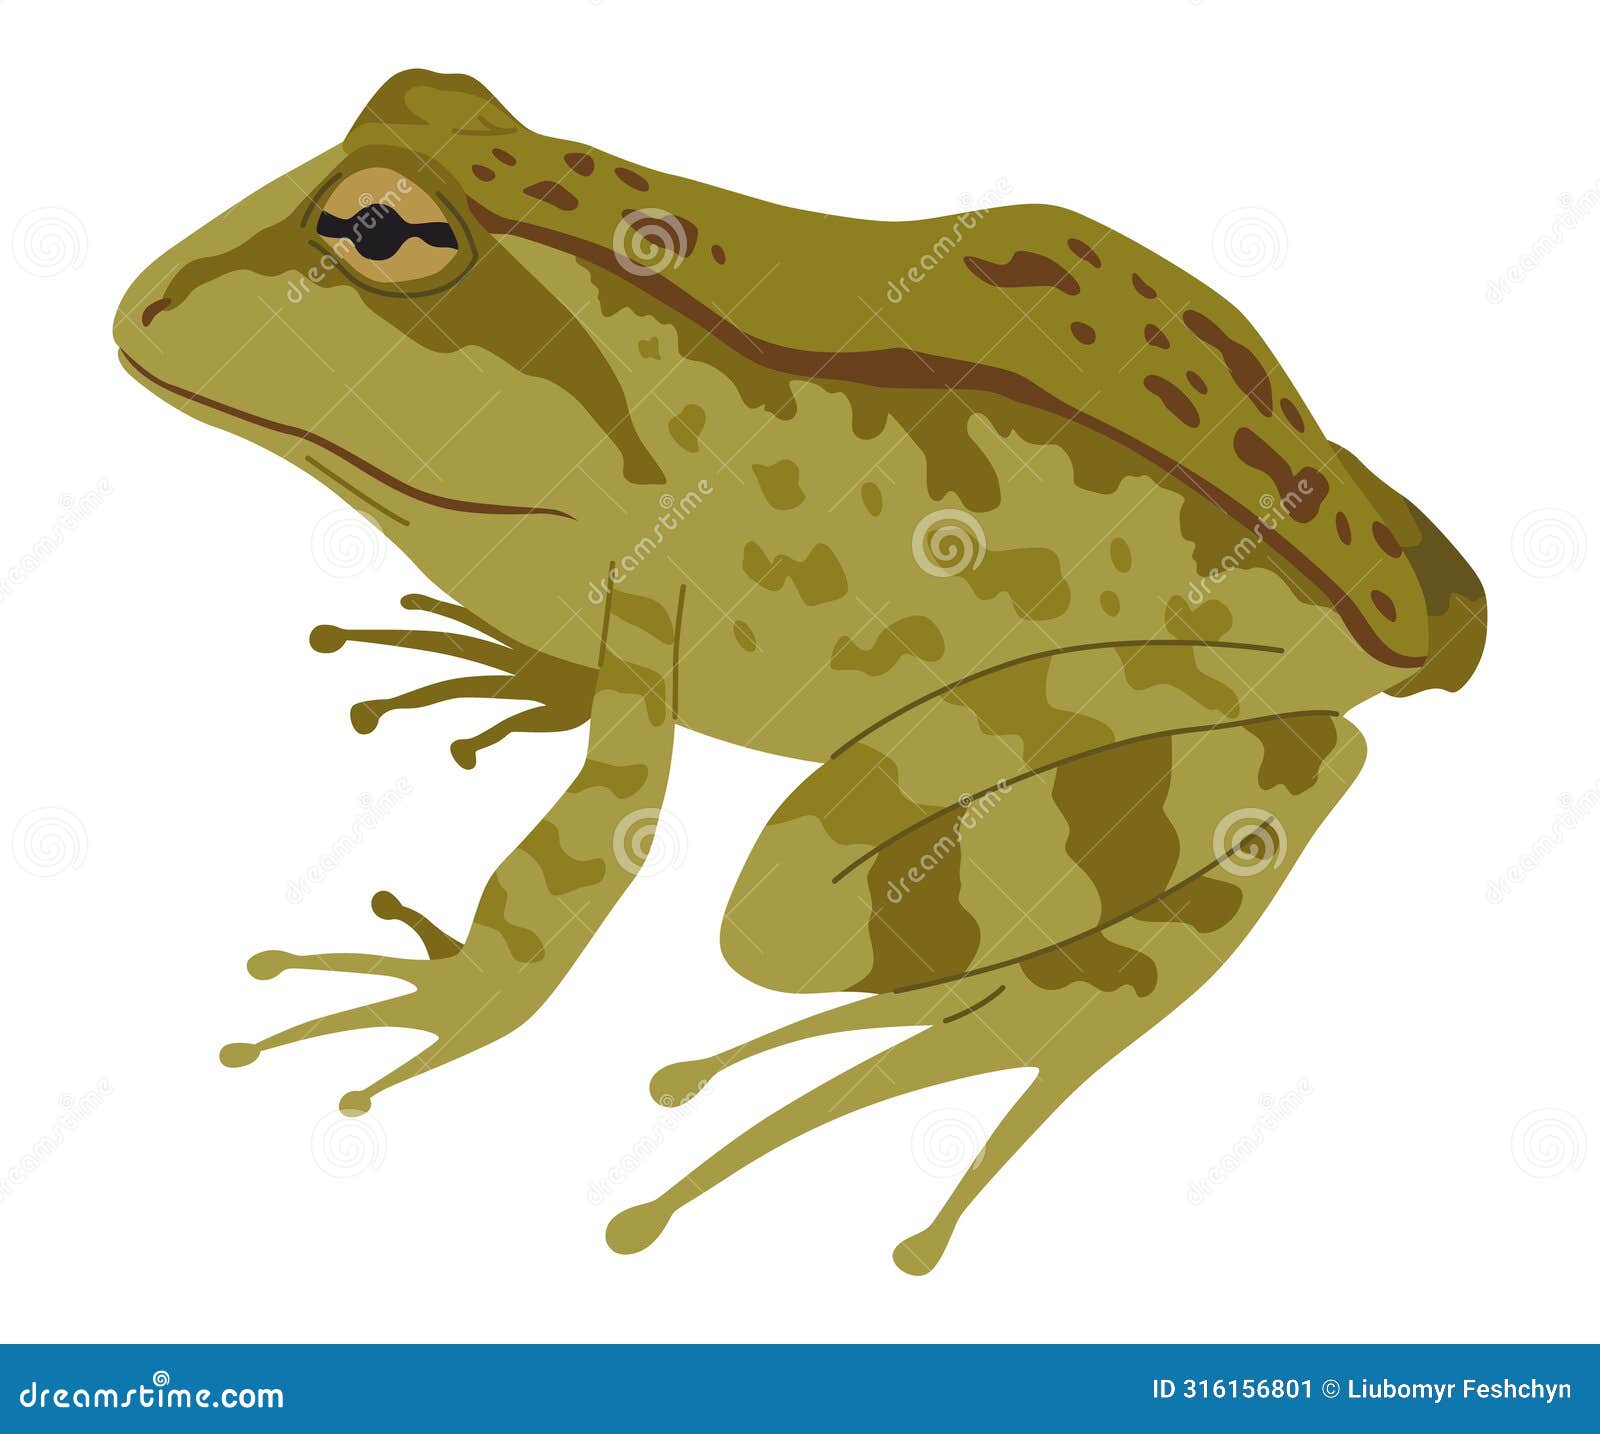 frog or toad, amphibian animal. type of froggy. exotic tropical reptile. flat   on white background